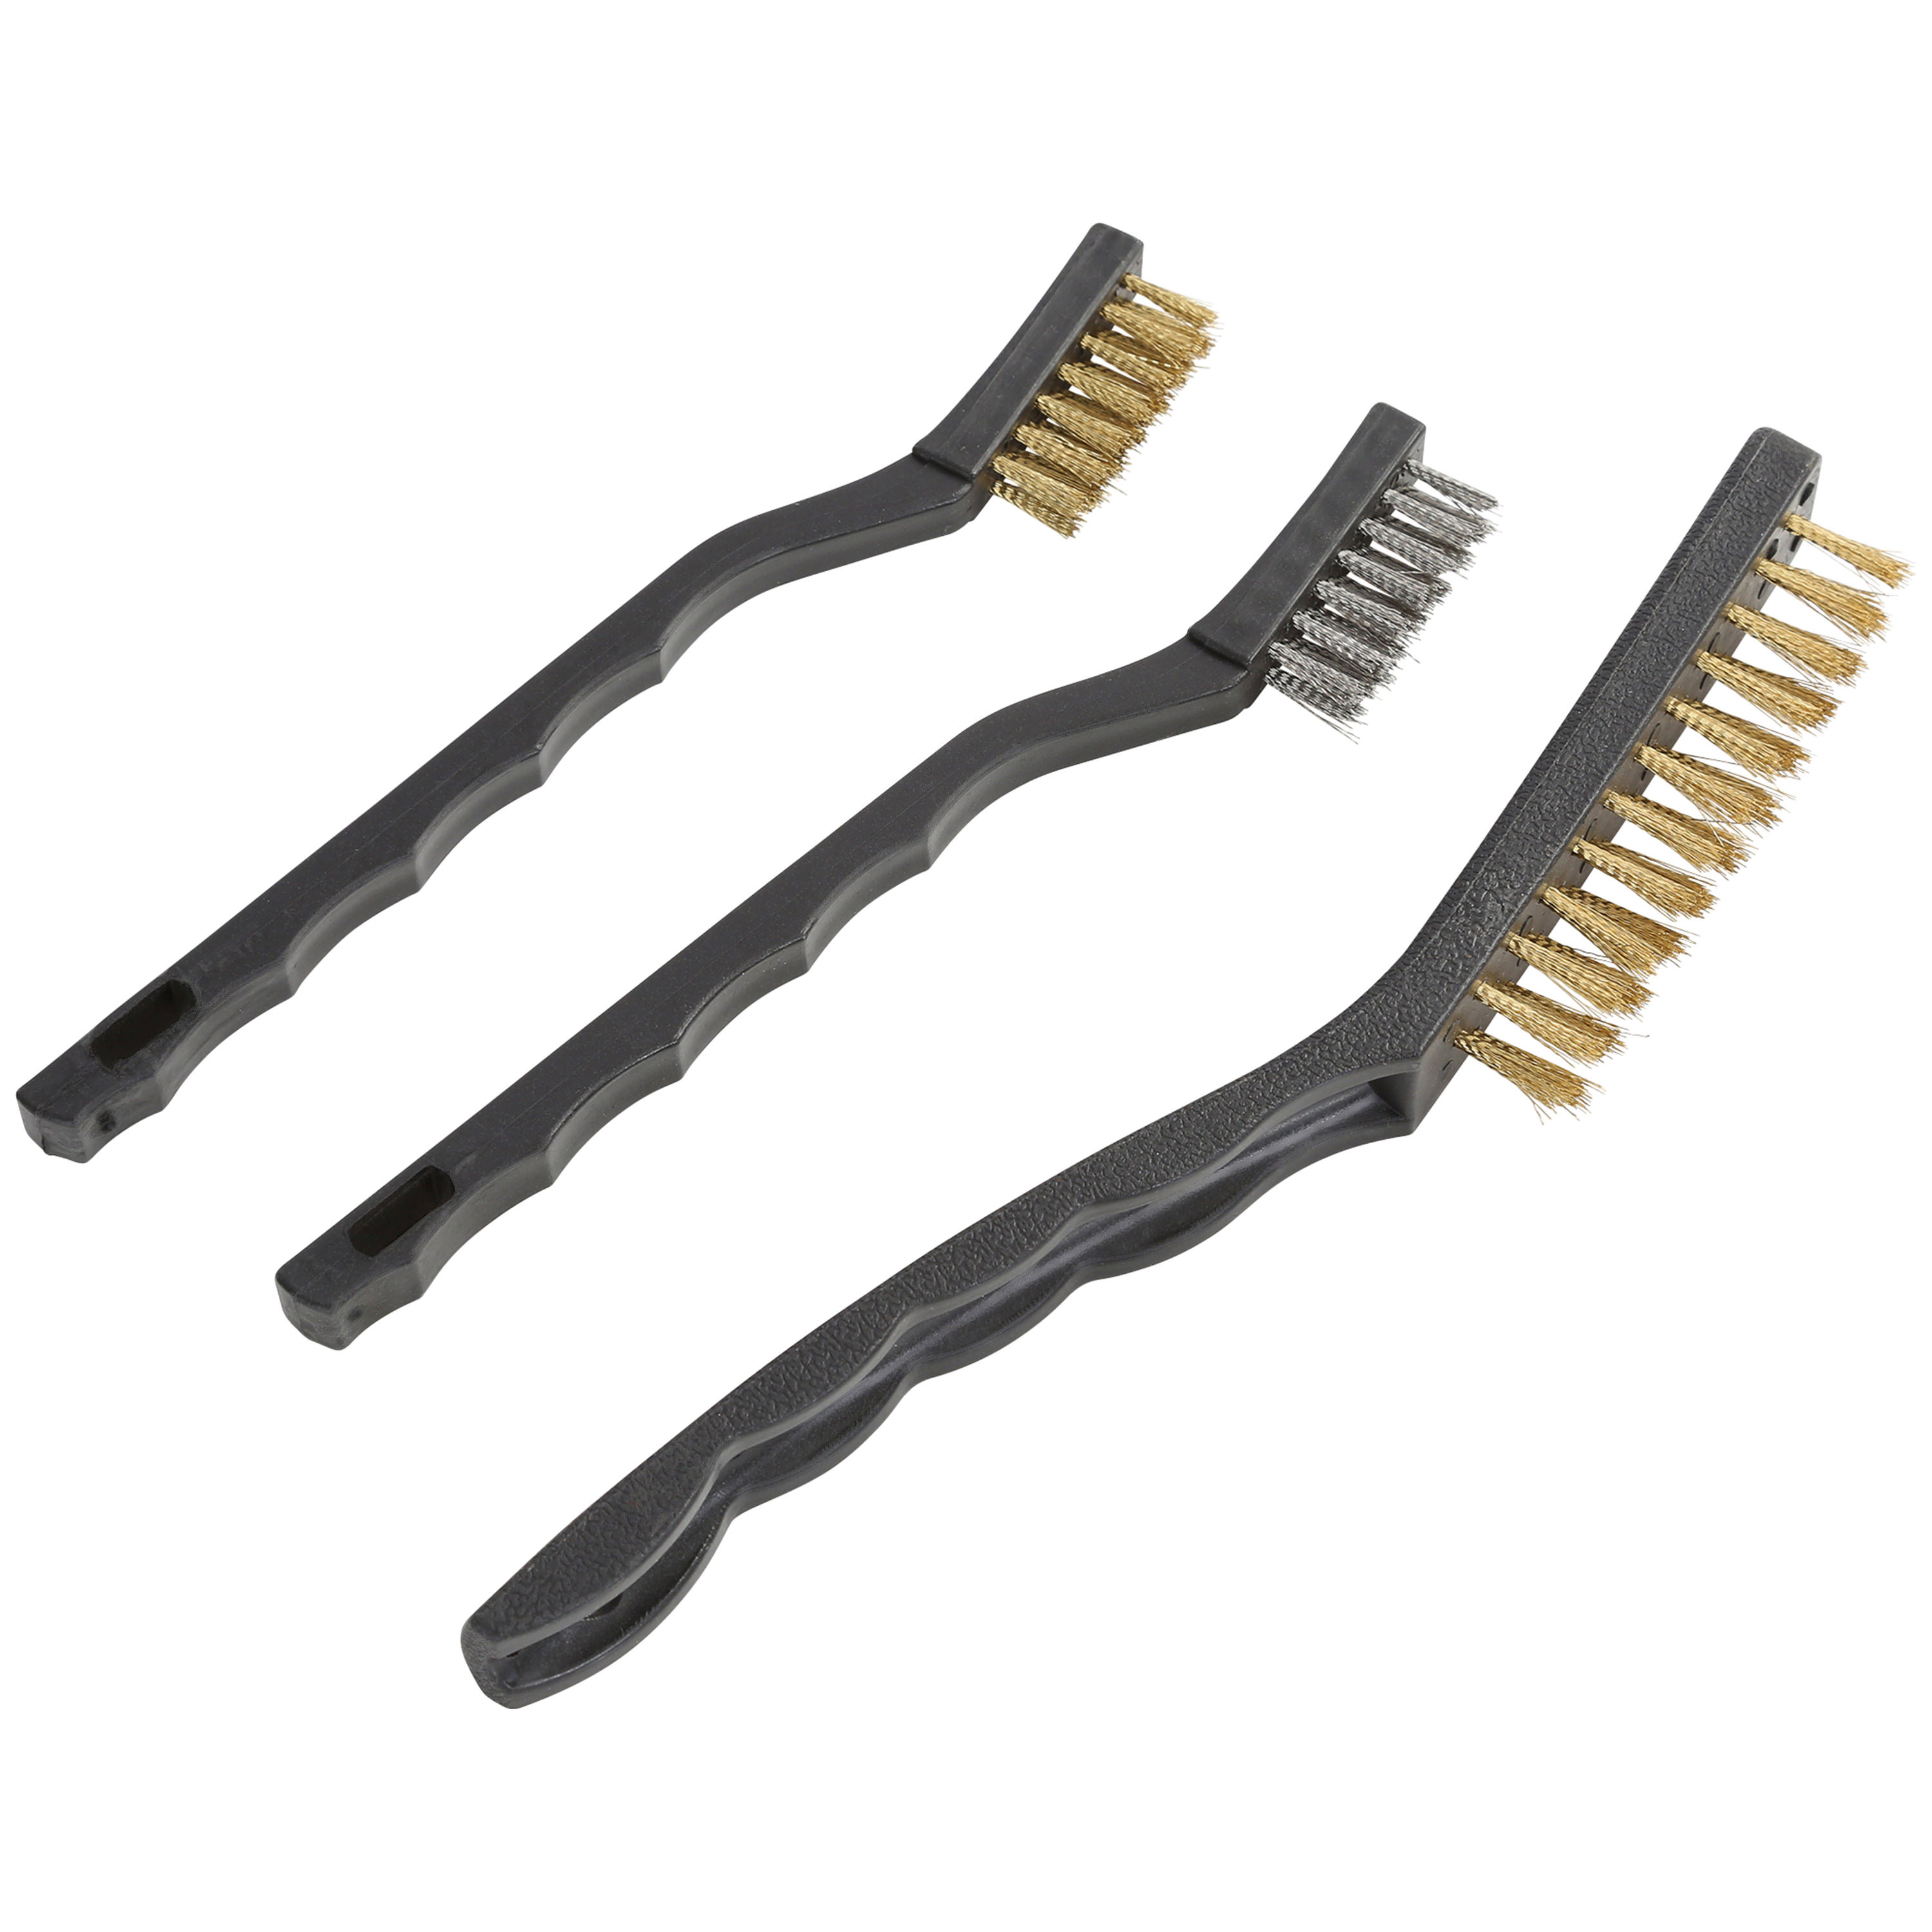 Hyper Tough 3-Piece Wire Brush Set for Utility Cleaning, Brass and Stainless Steel Brushes - image 1 of 8